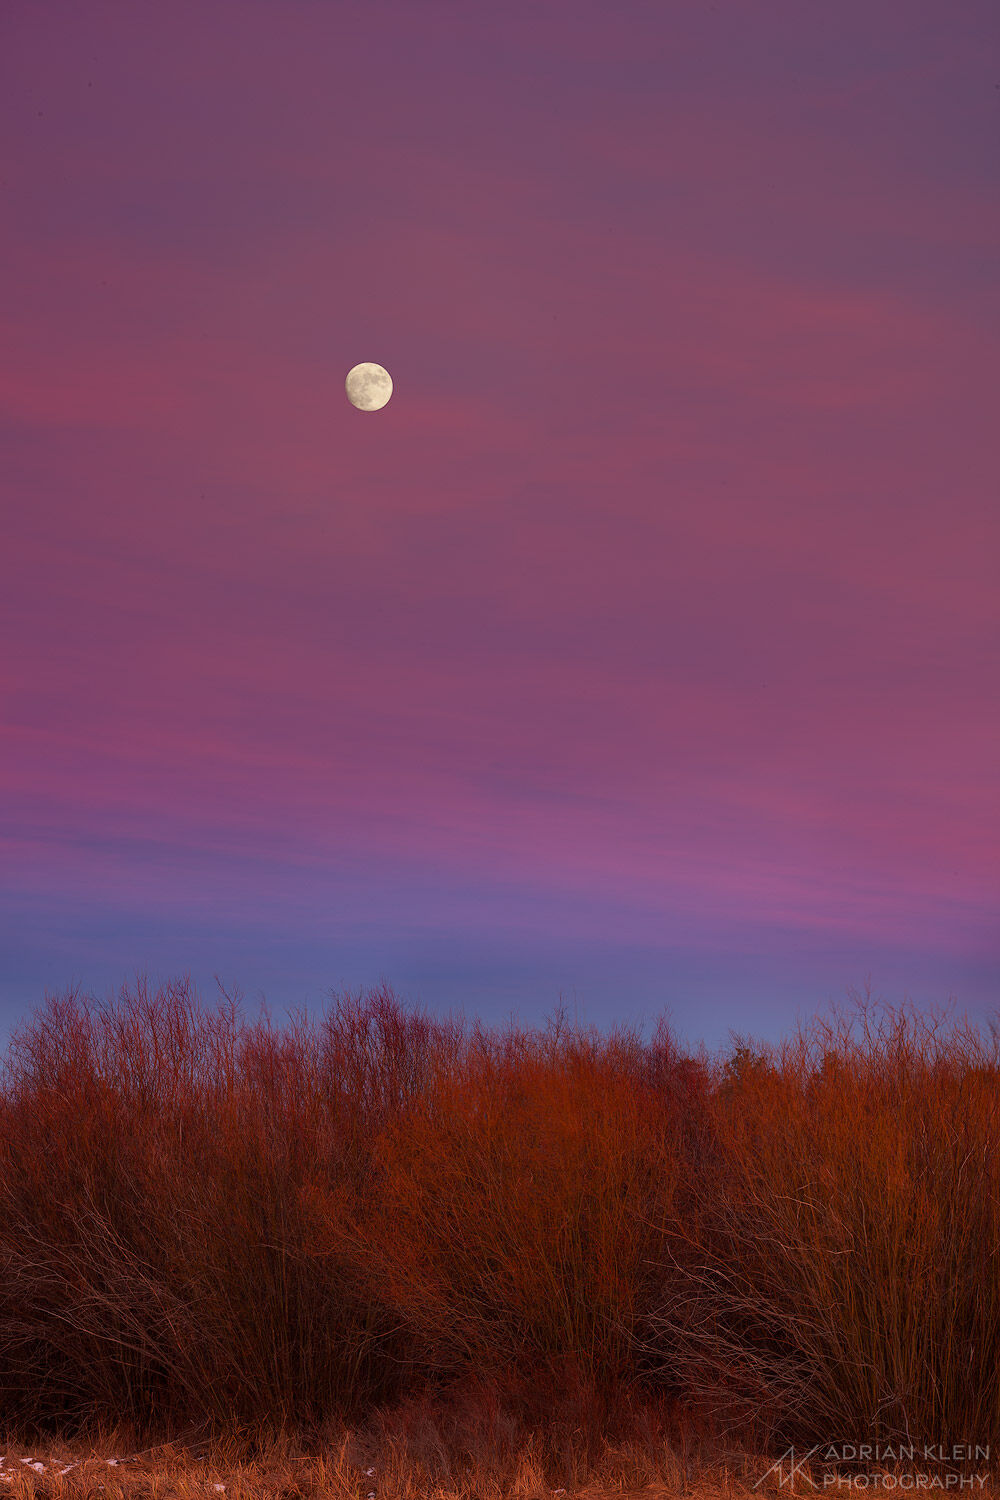 An almost full moon rising above a forest of reeds along the Deschutes River in Central Oregon in winter.